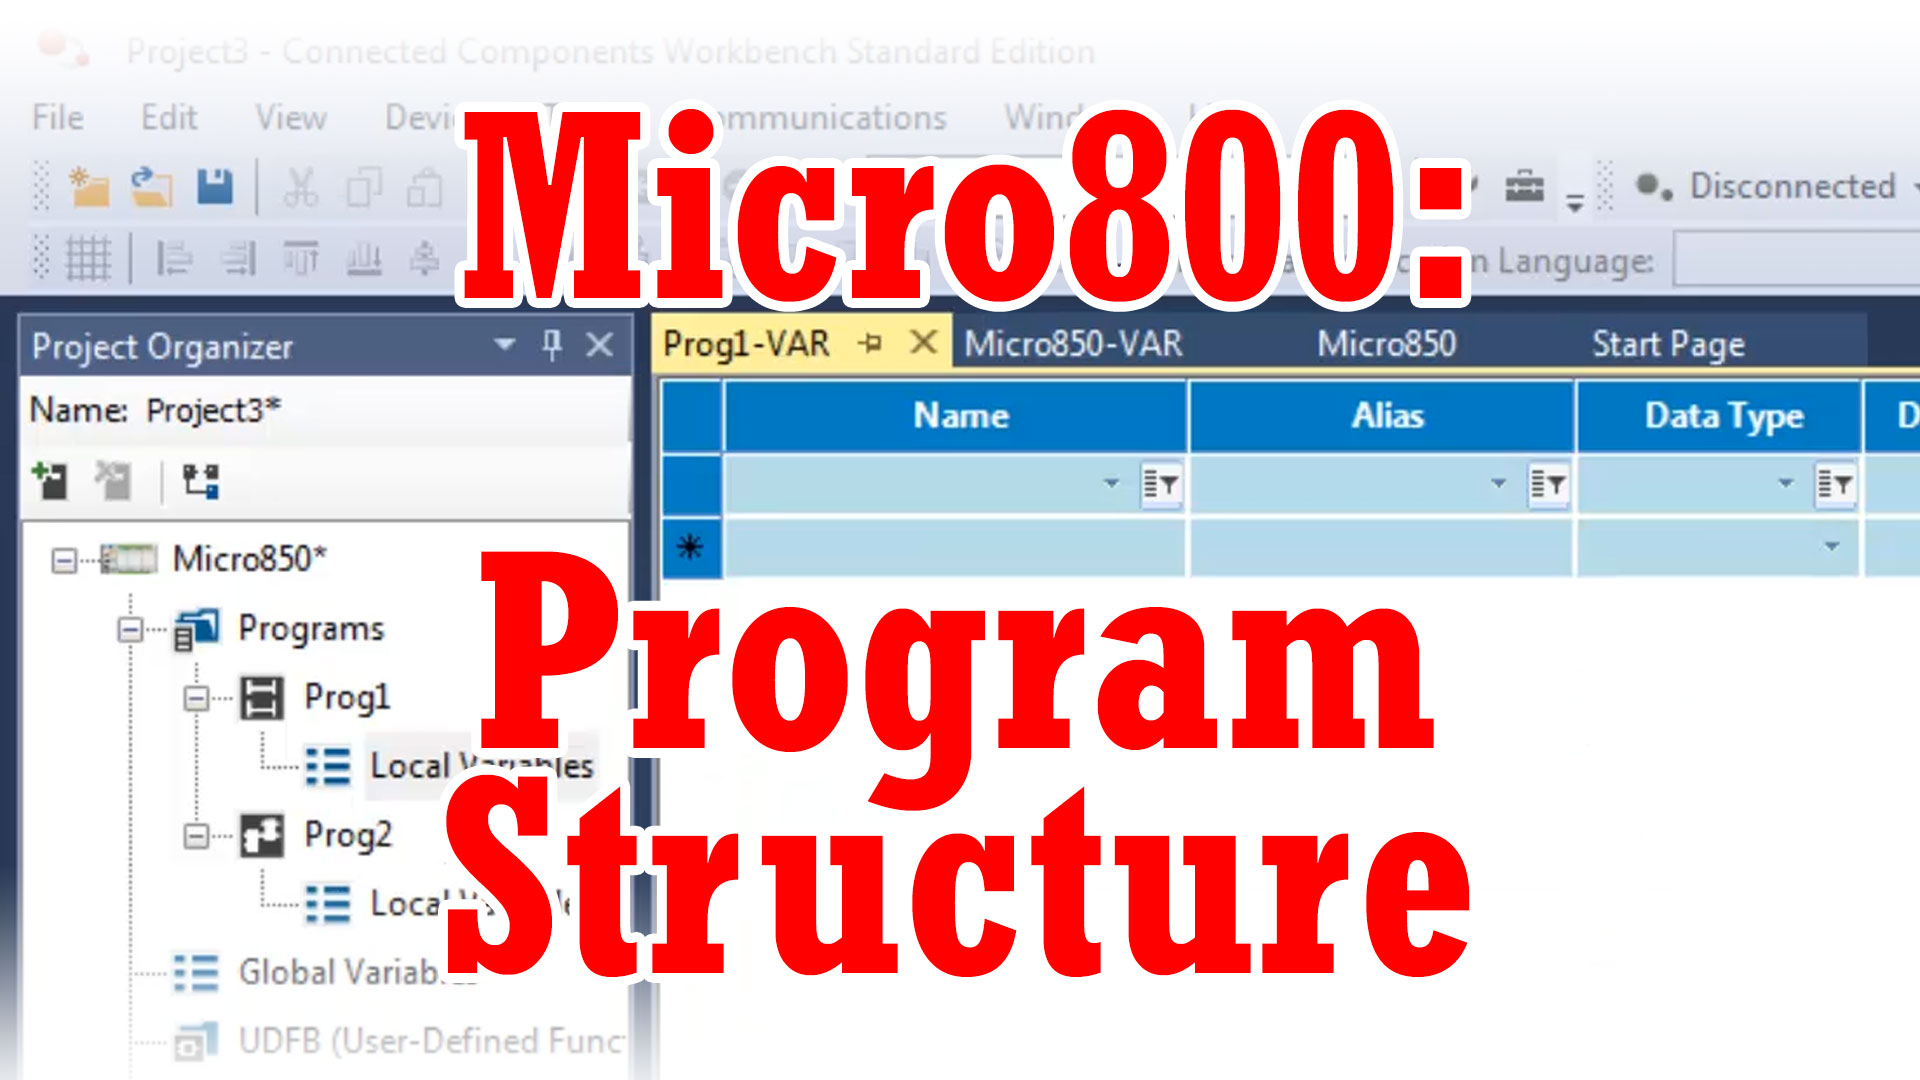 Micro800, CCW - Program Structure: How Programs, Variables differ from other A-B PLCs